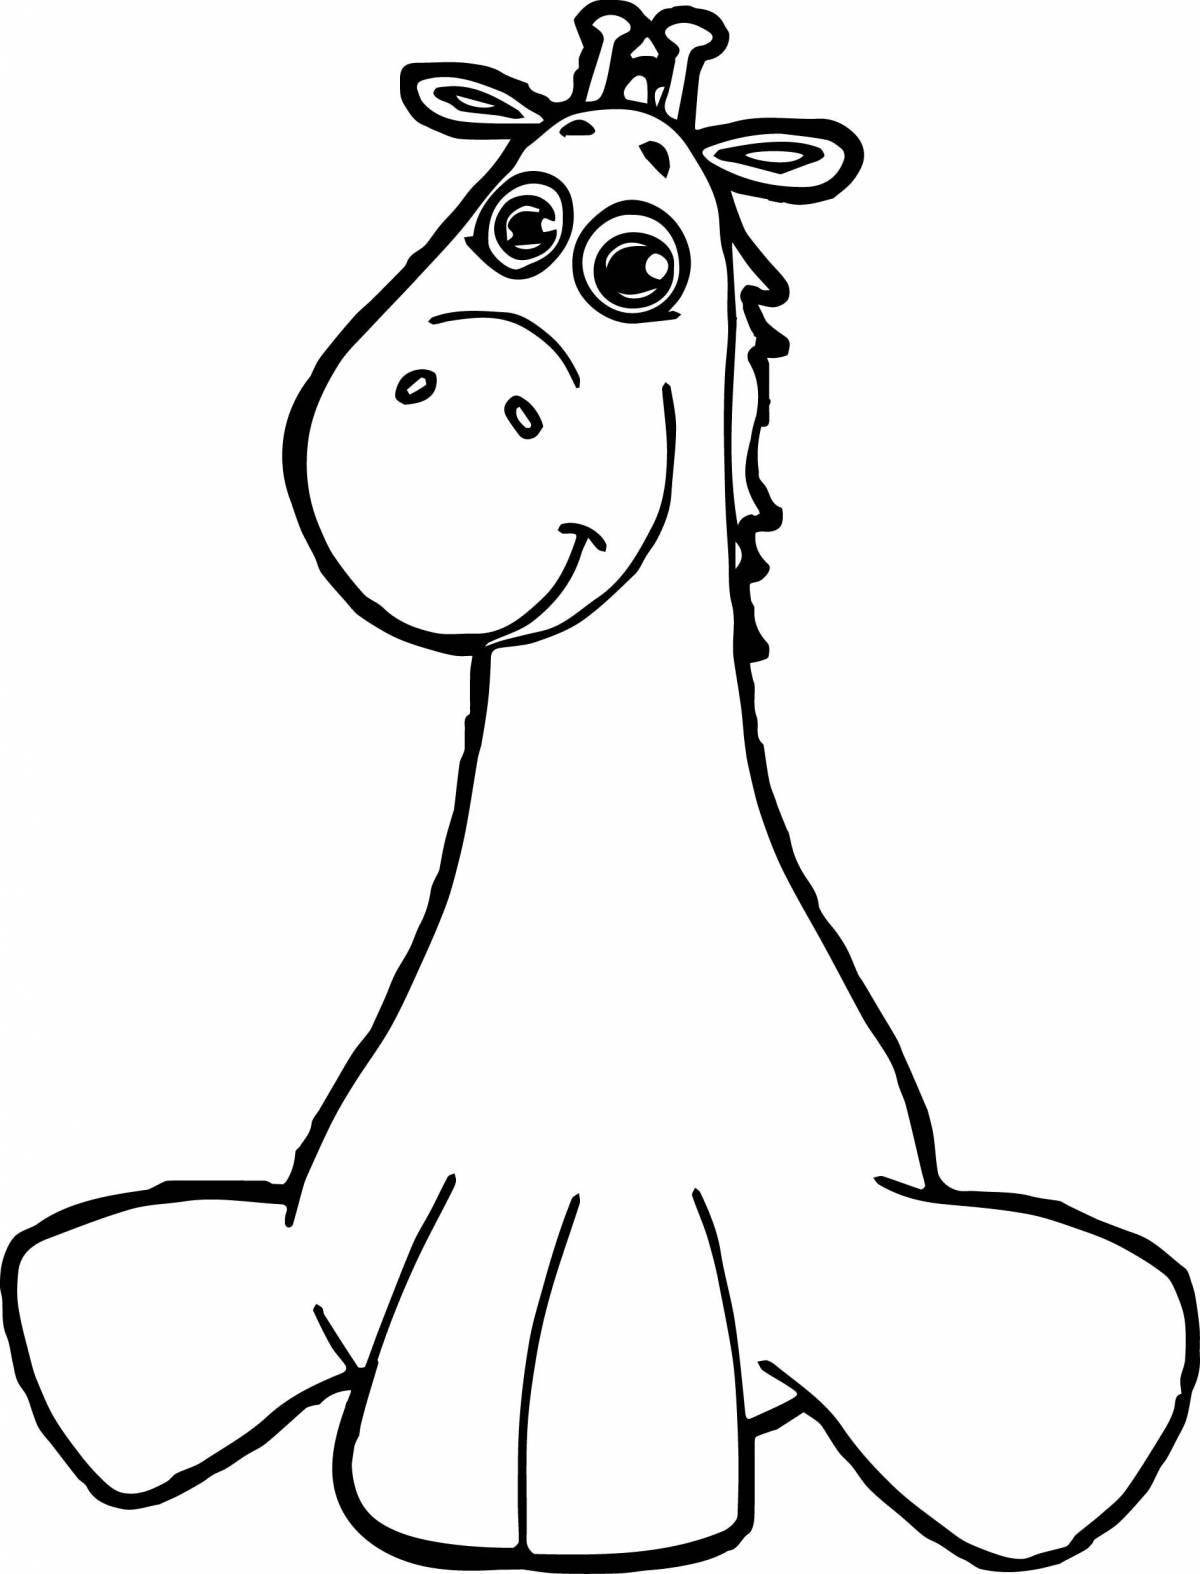 Giraffe without spots for kids #2